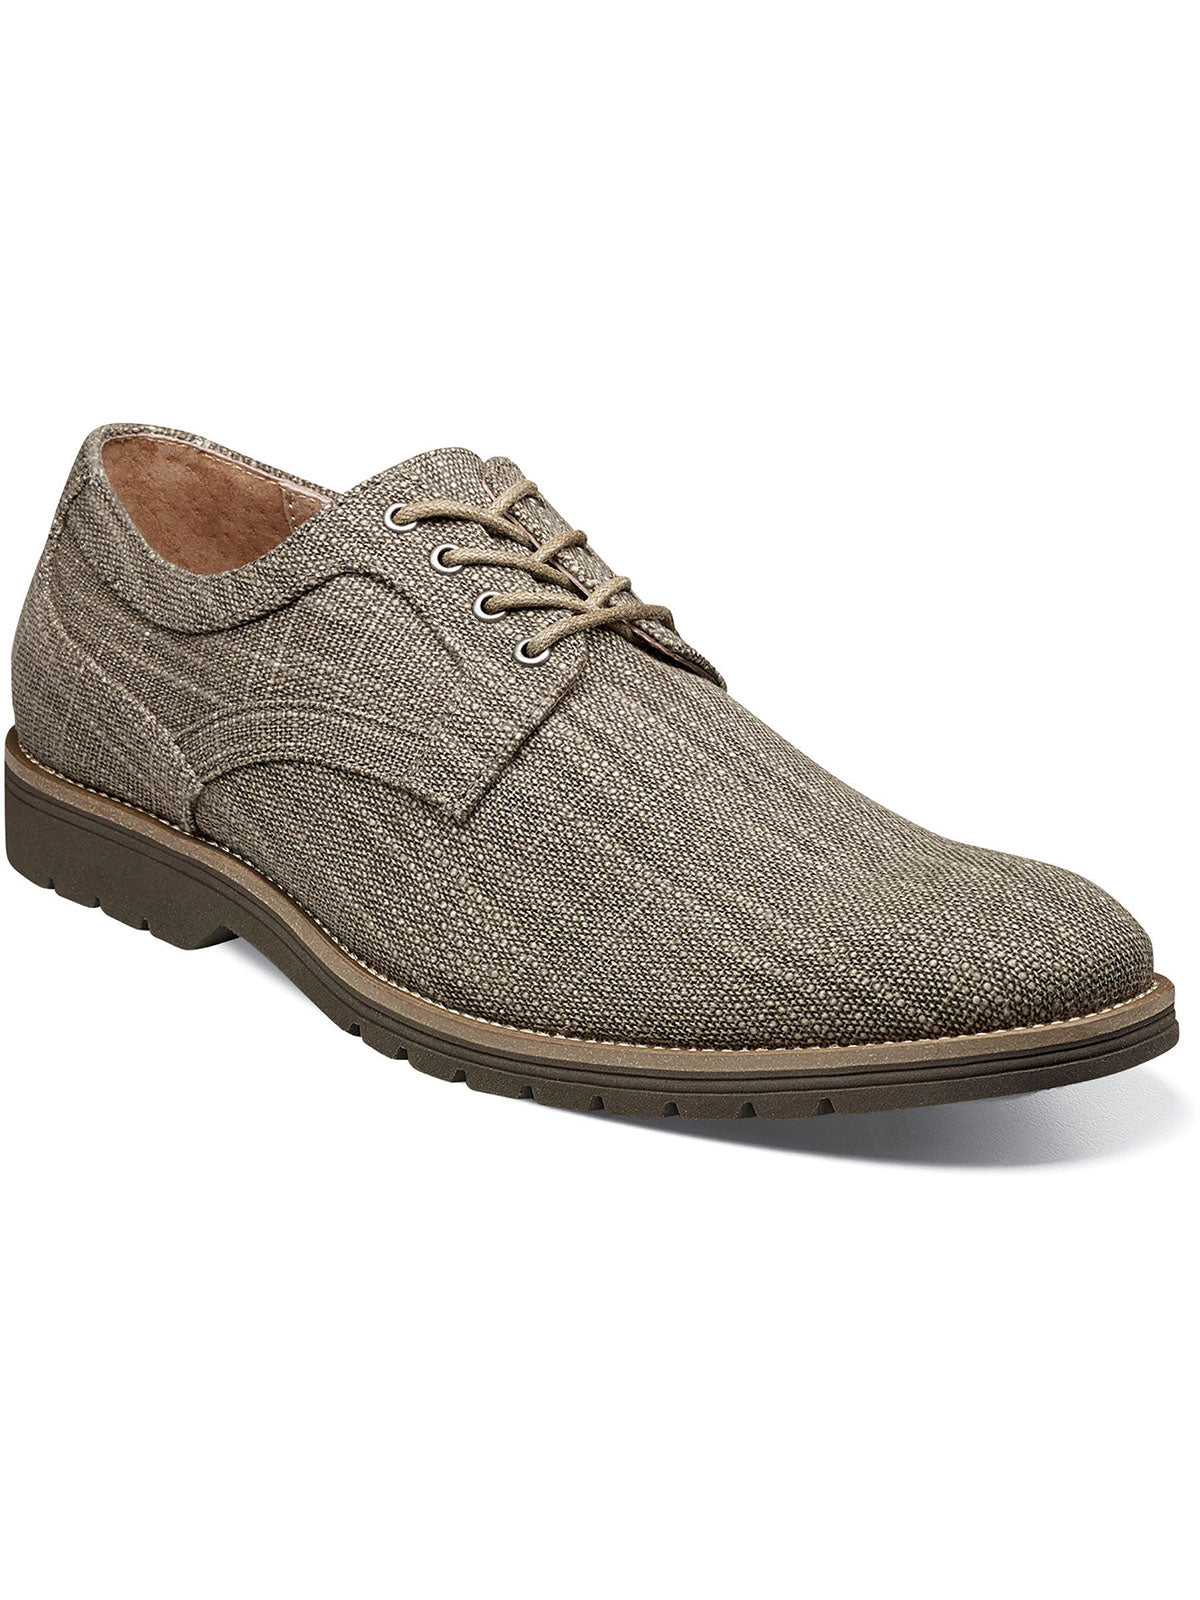 Stacy Adams "Eli" Plain Toe Oxford Canvas Dress Shoes in Taupe